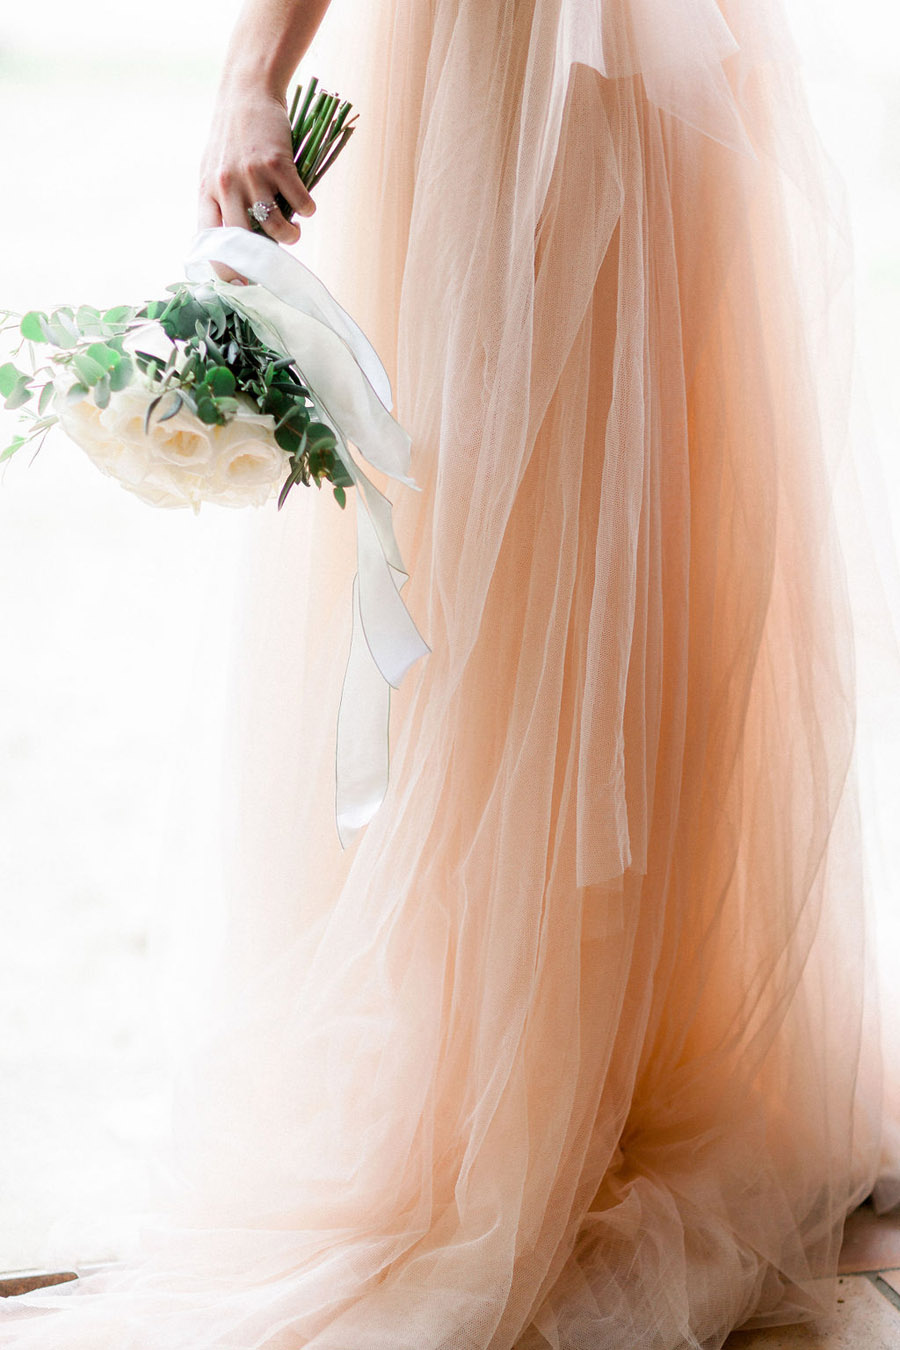 Hand-Me-Down Wedding Dresses: Tips & Tricks to Make the Dress Work for You